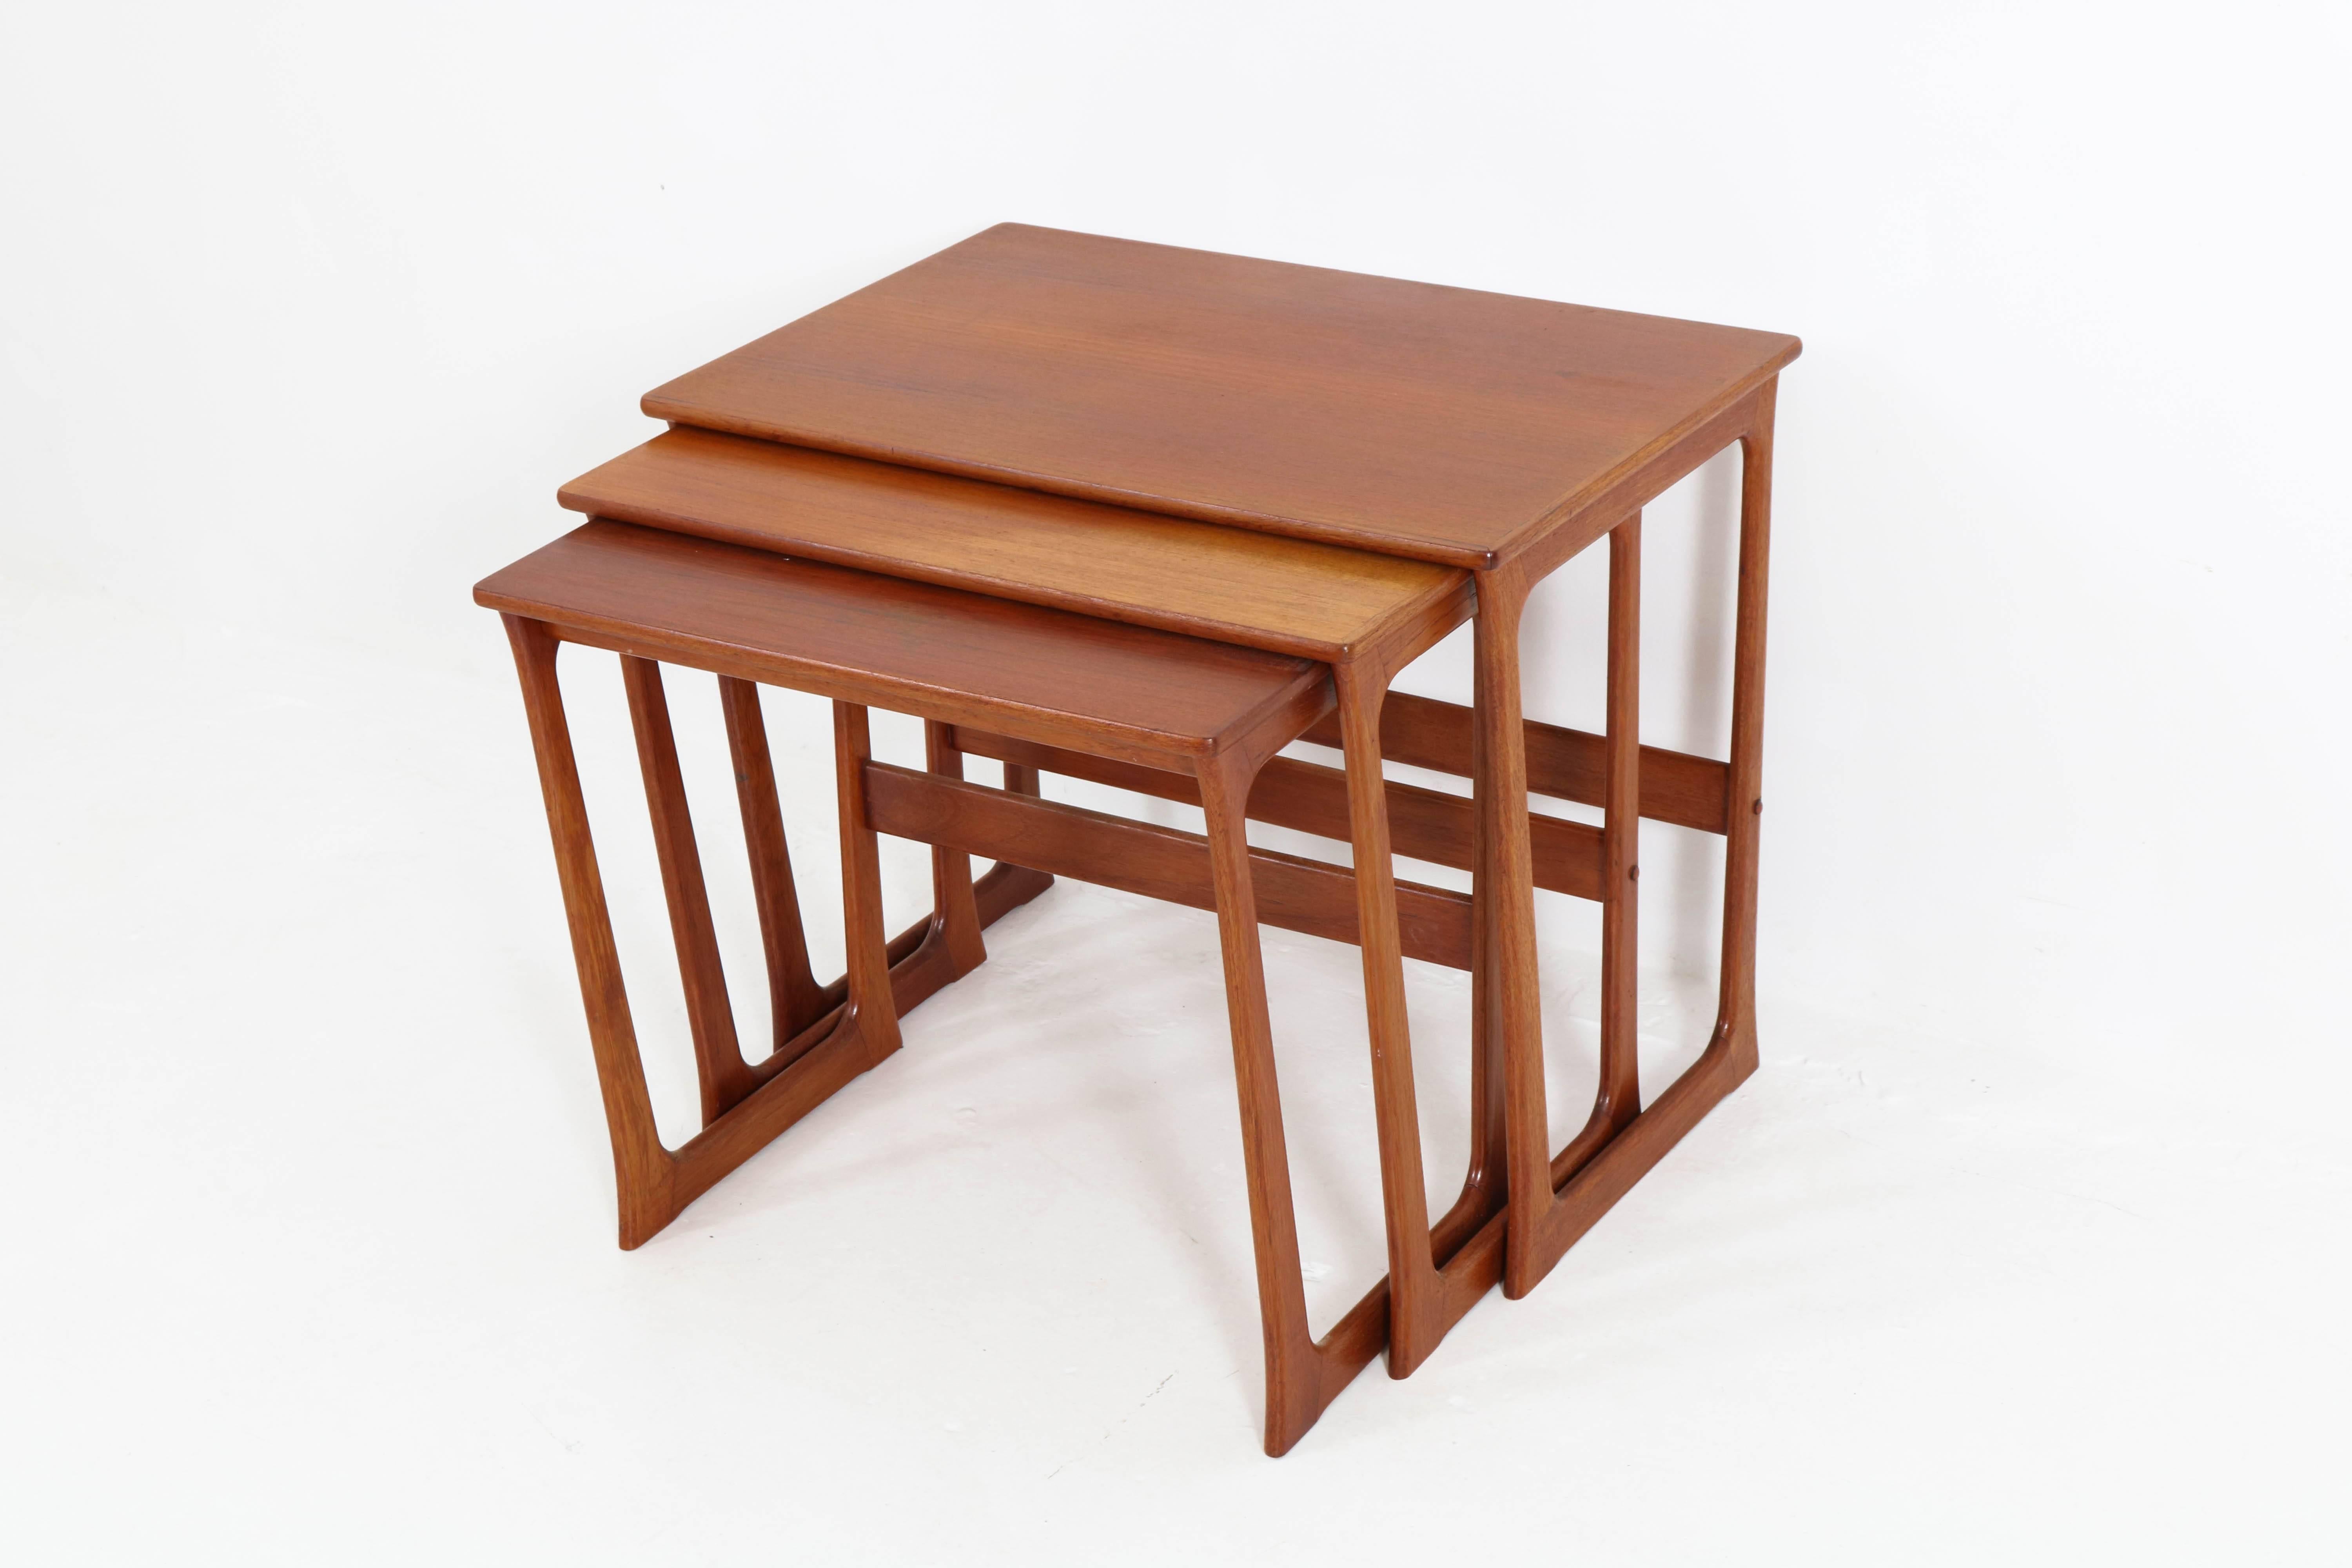 Nice set of Danish Mid-Century Modern nesting tables by Johannes Andersen, 1960s.
Solid teak.
Marked: Made in Denmark.
In good original condition with minor wear consistent with age and use,
preserving a beautiful patina.